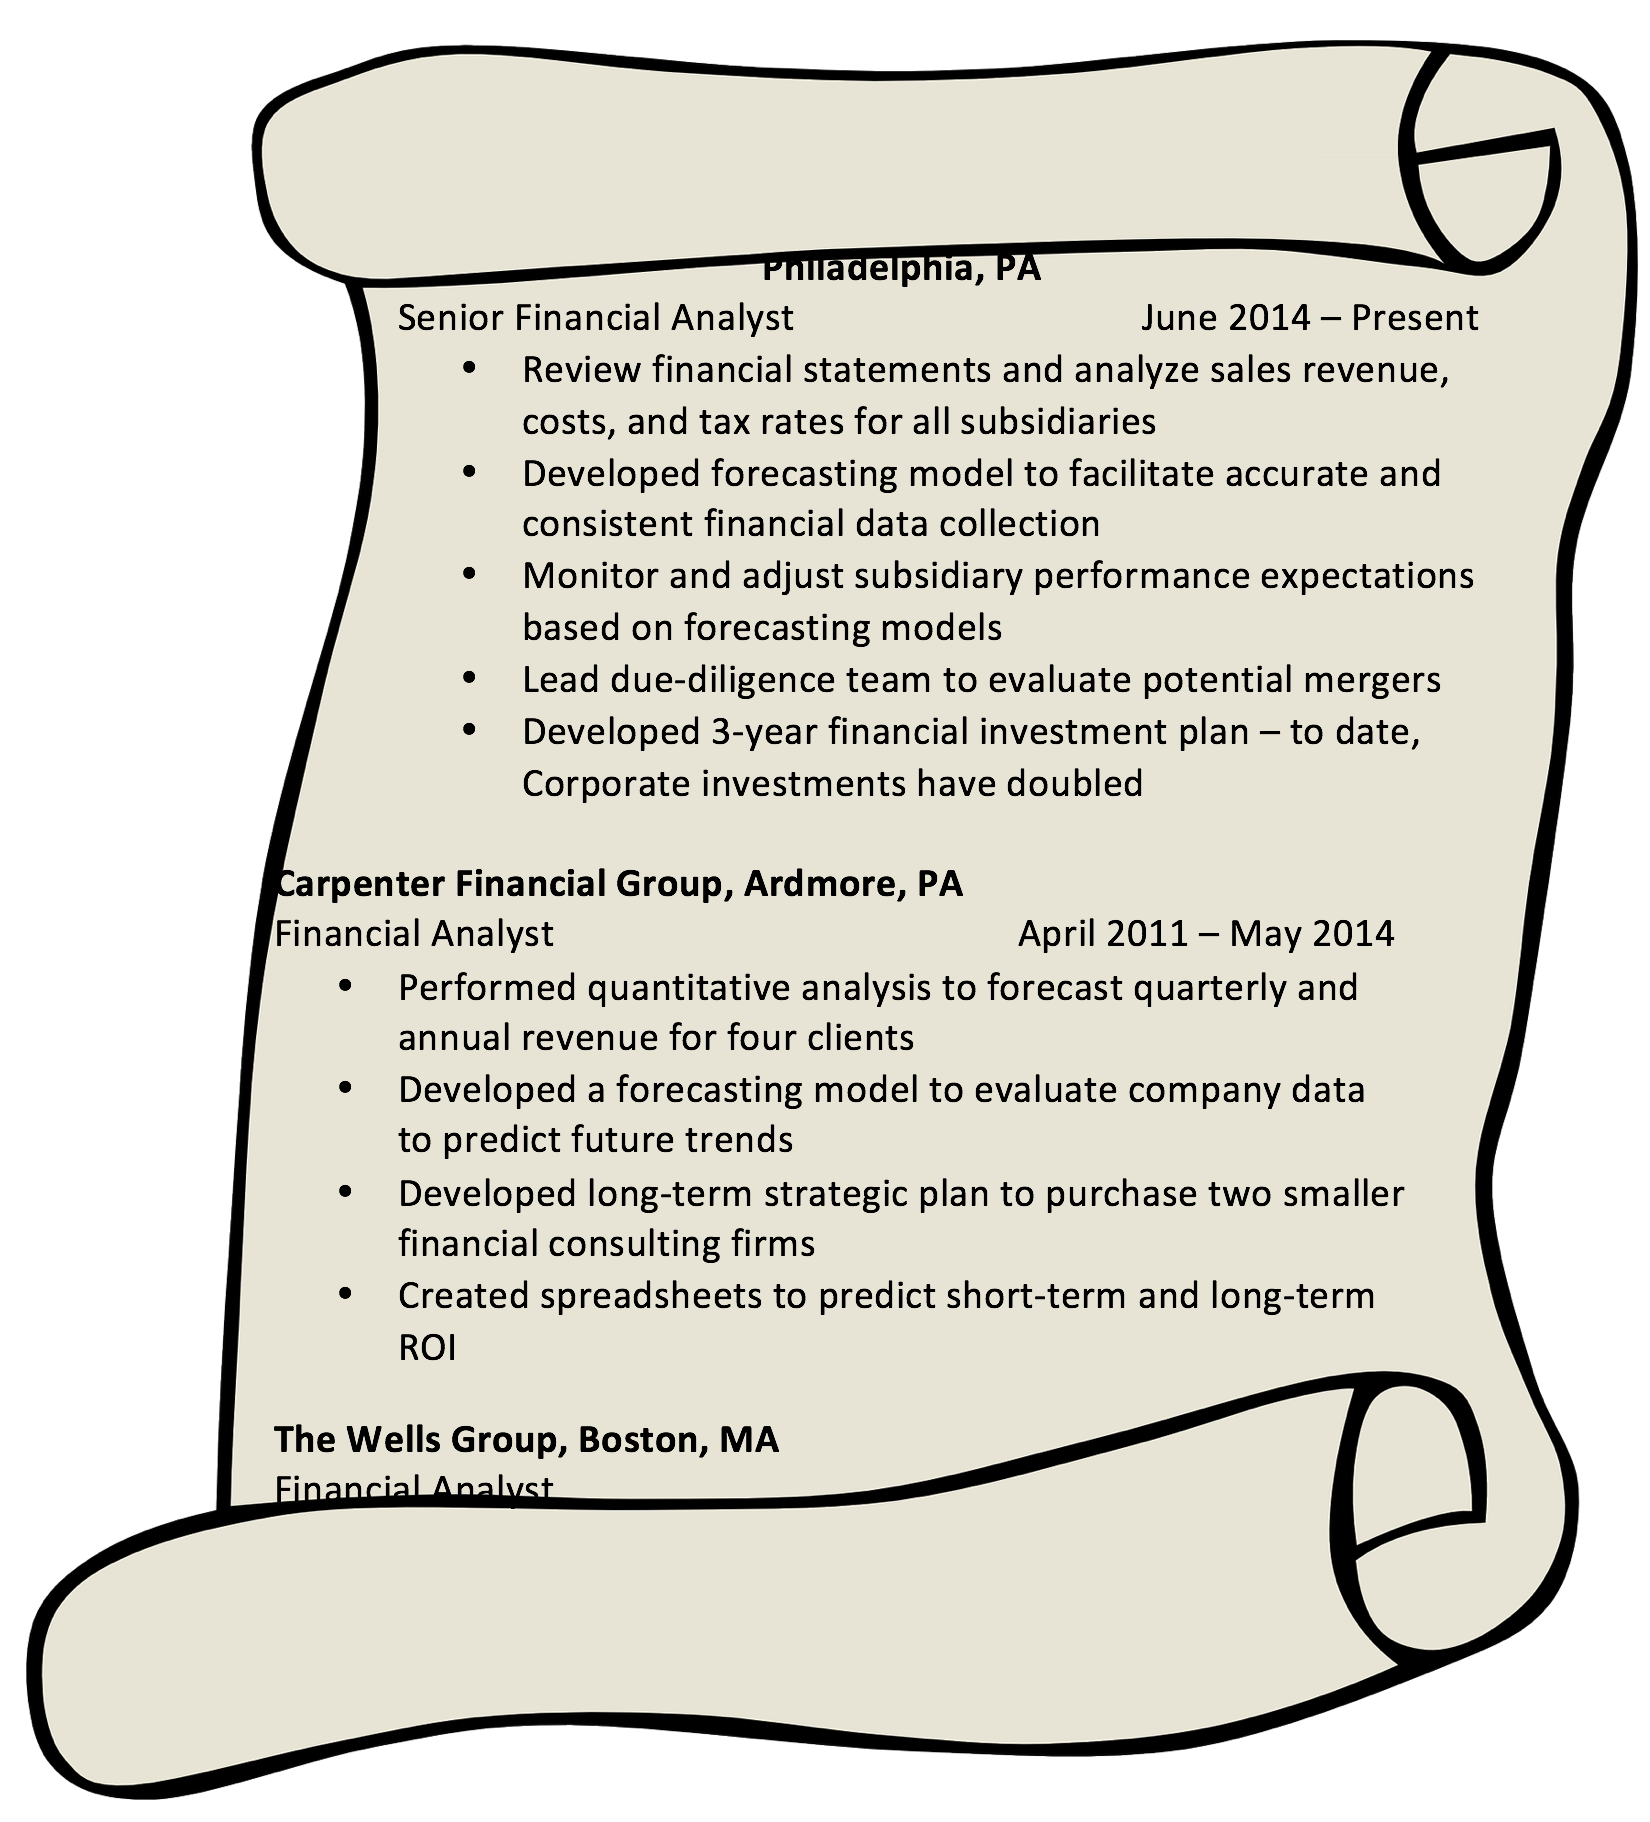 Image of a scroll-looking resume